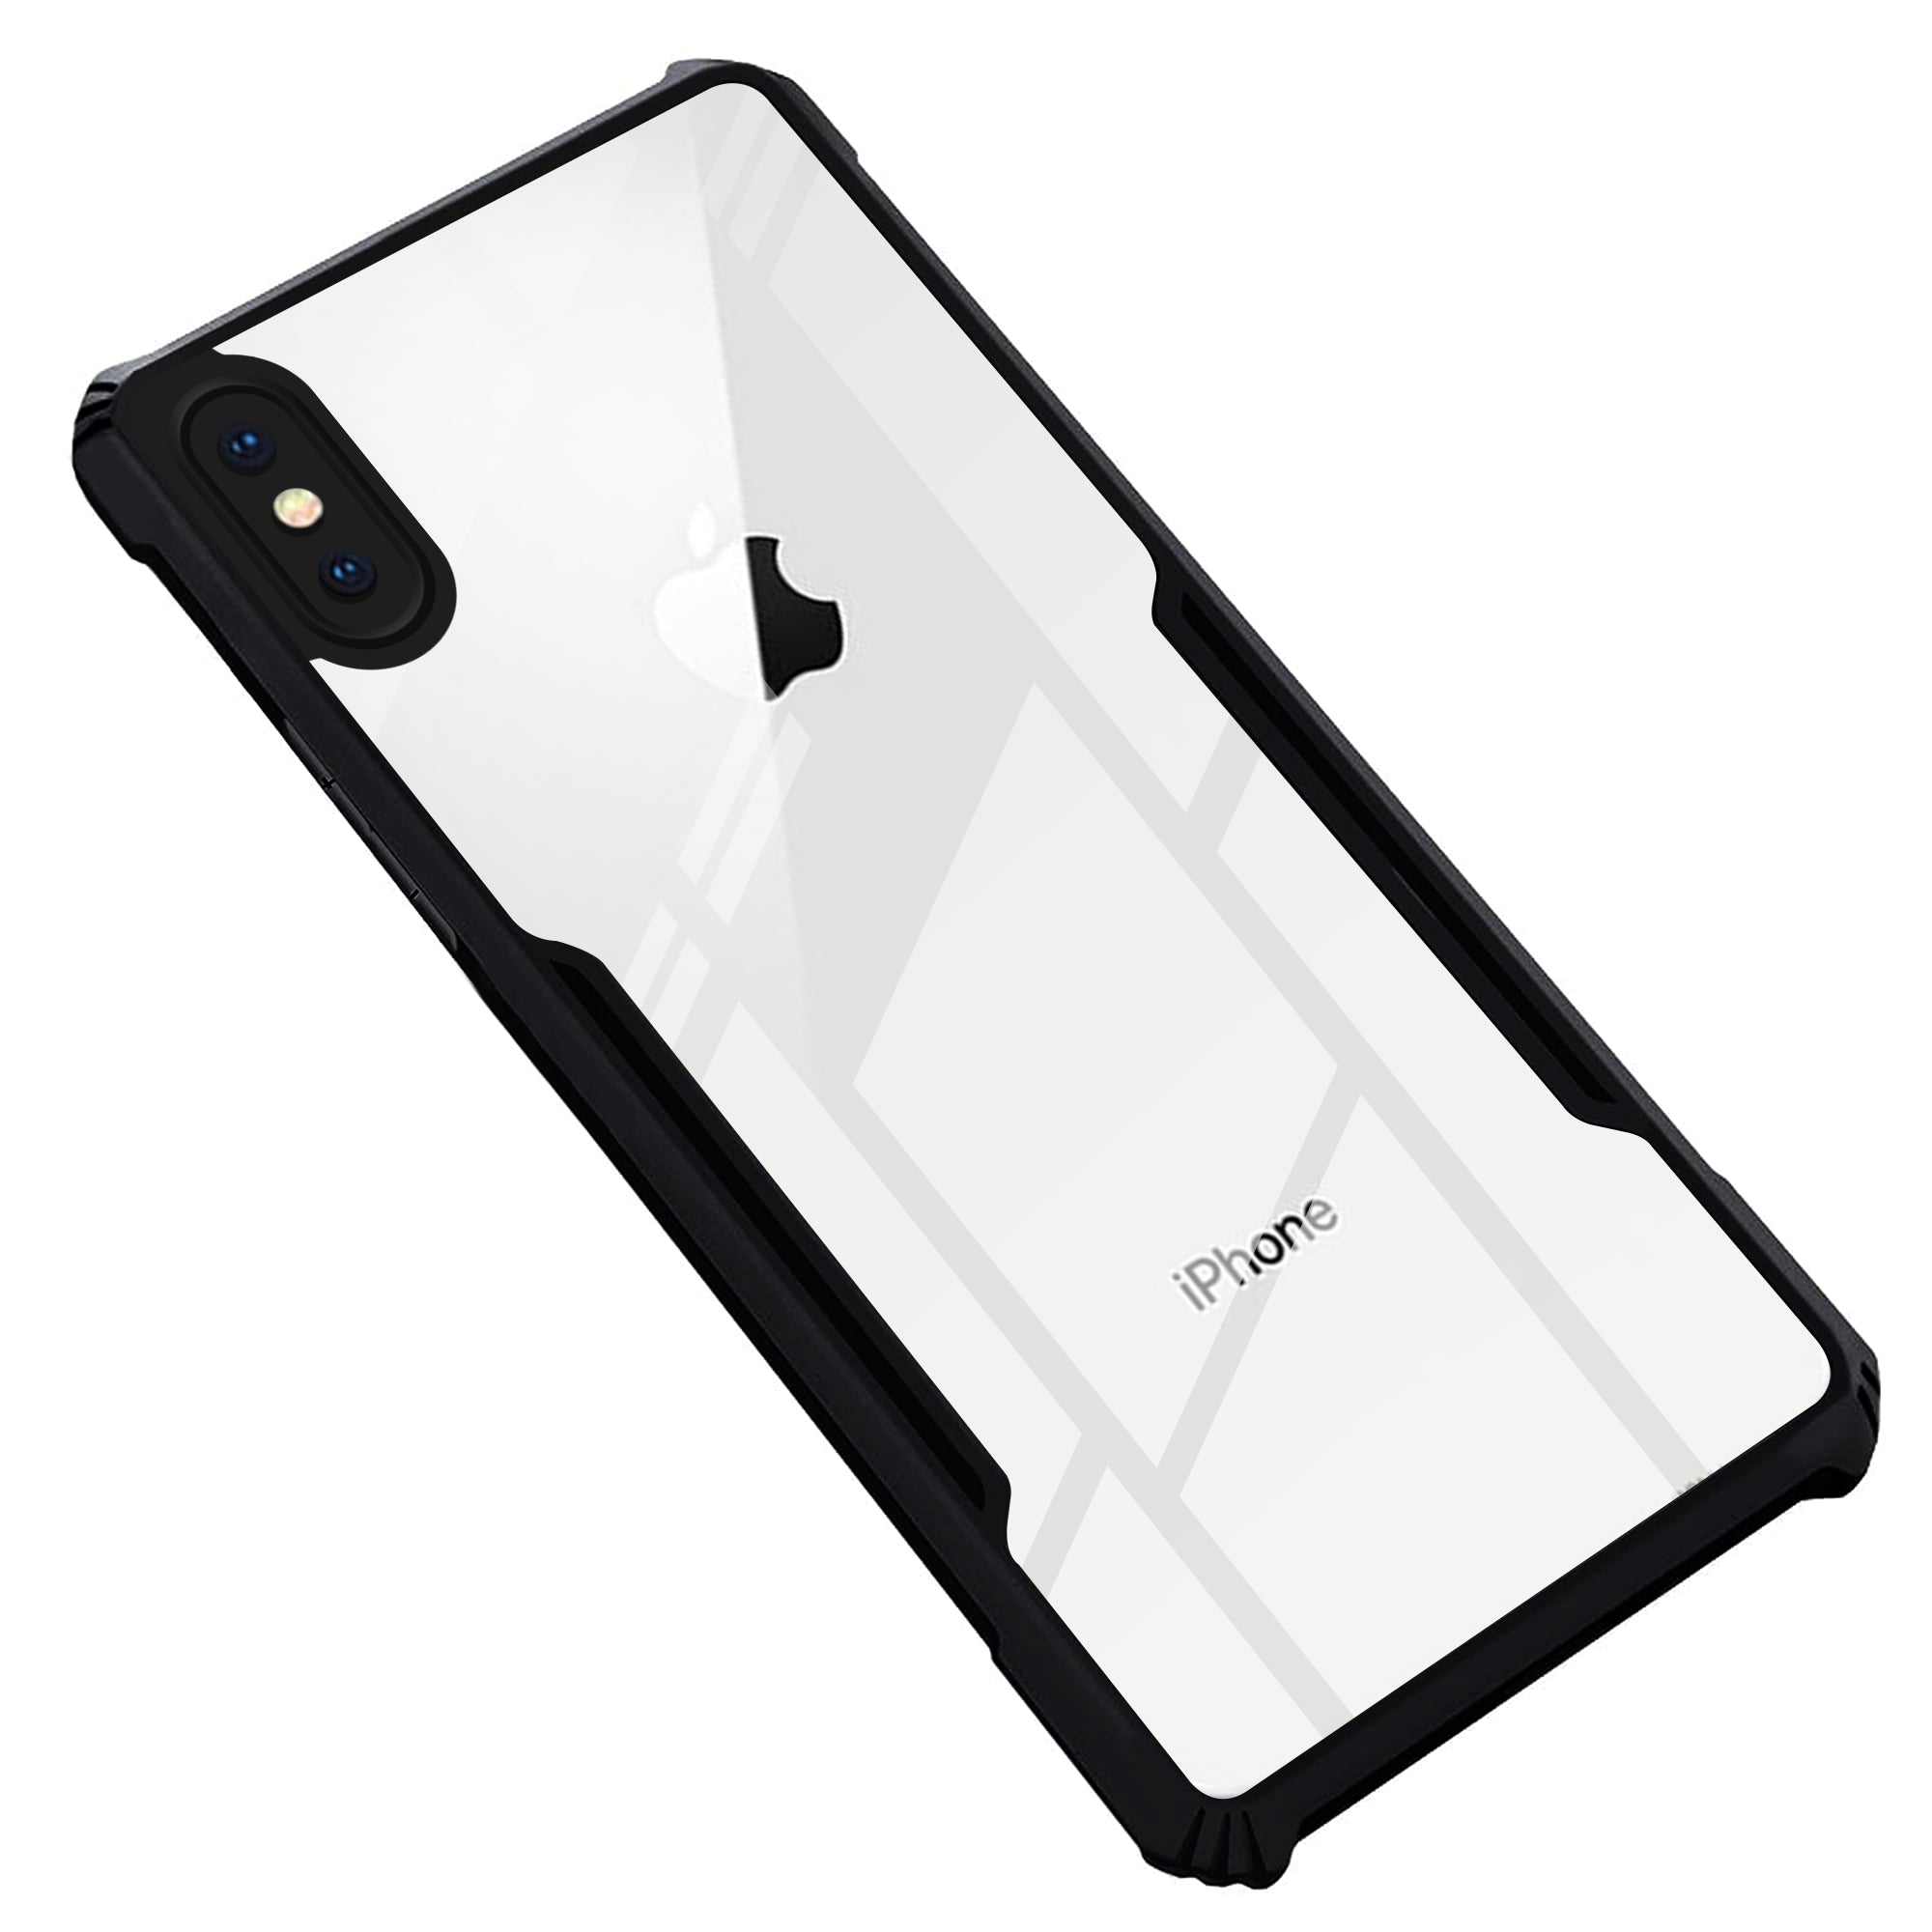 Premium Acrylic Transparent Back Cover for iPhone X